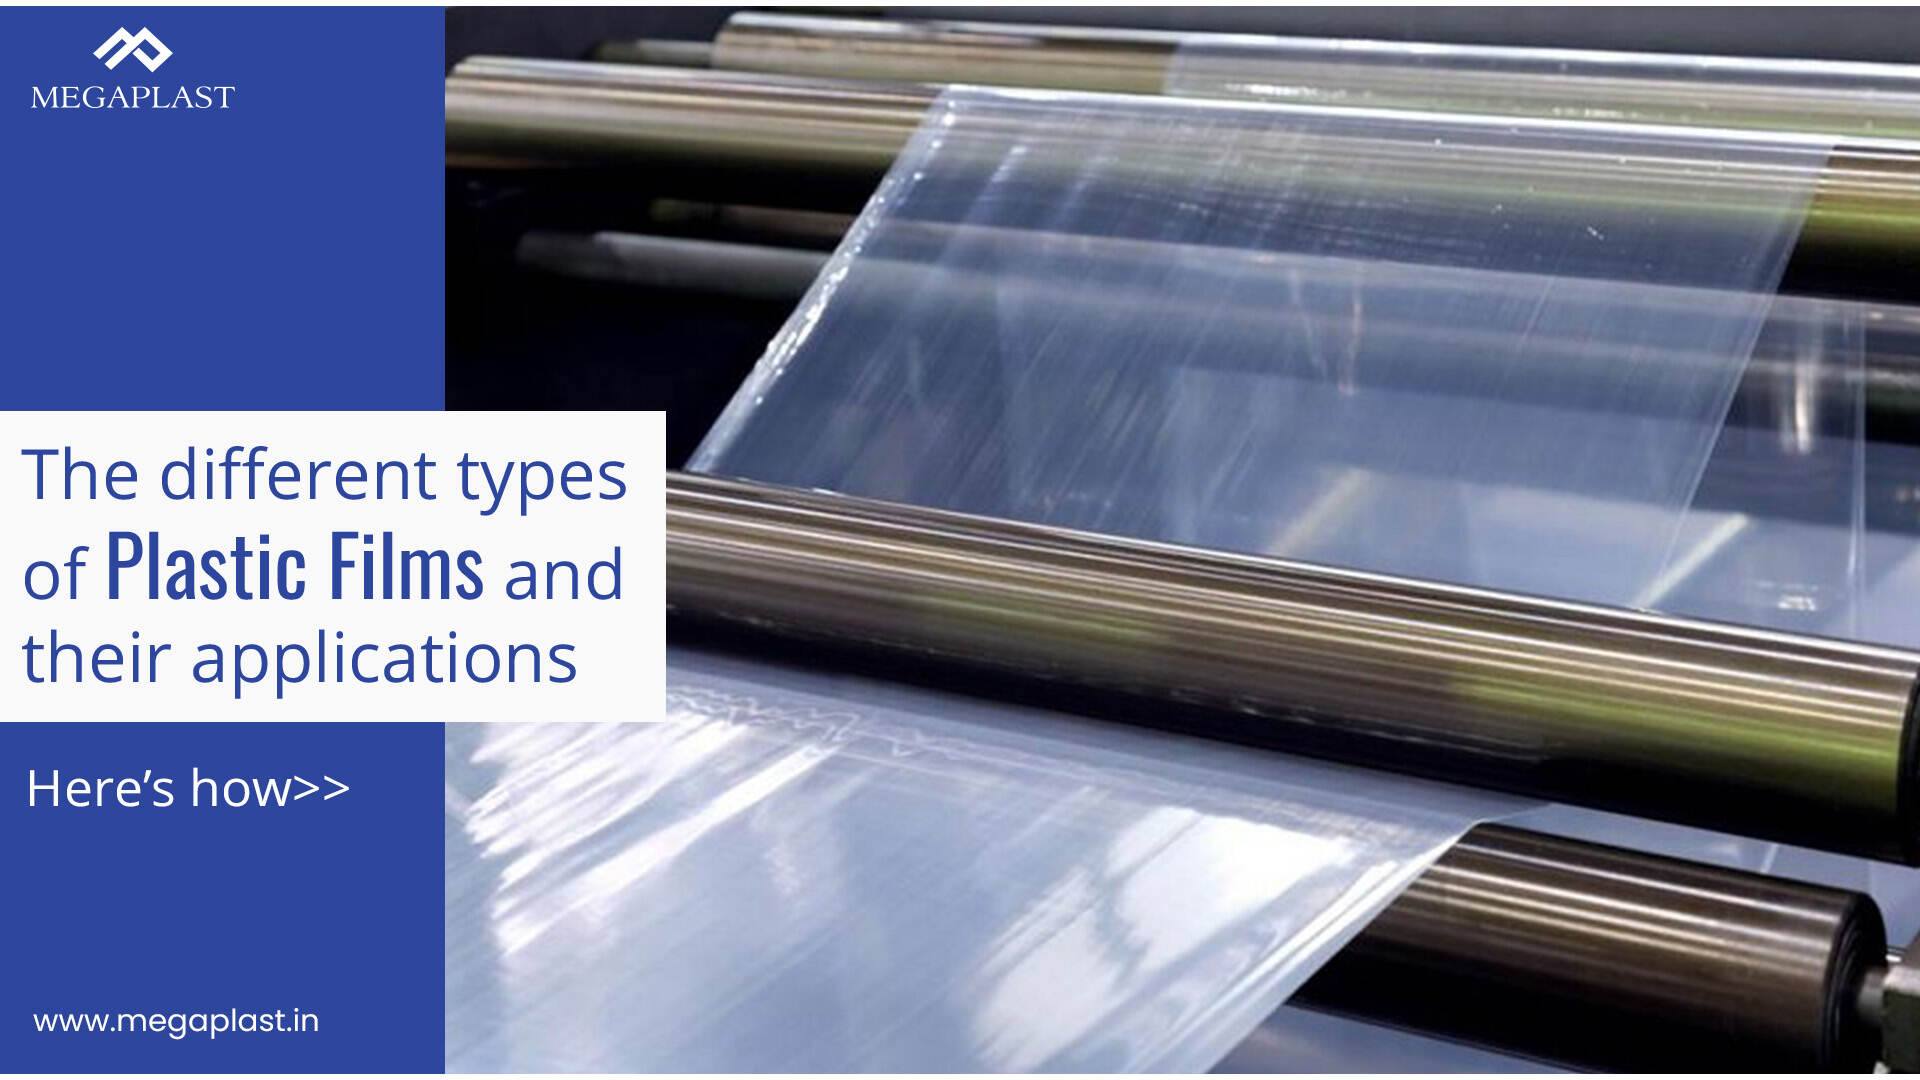 The different types of plastic films and their applications